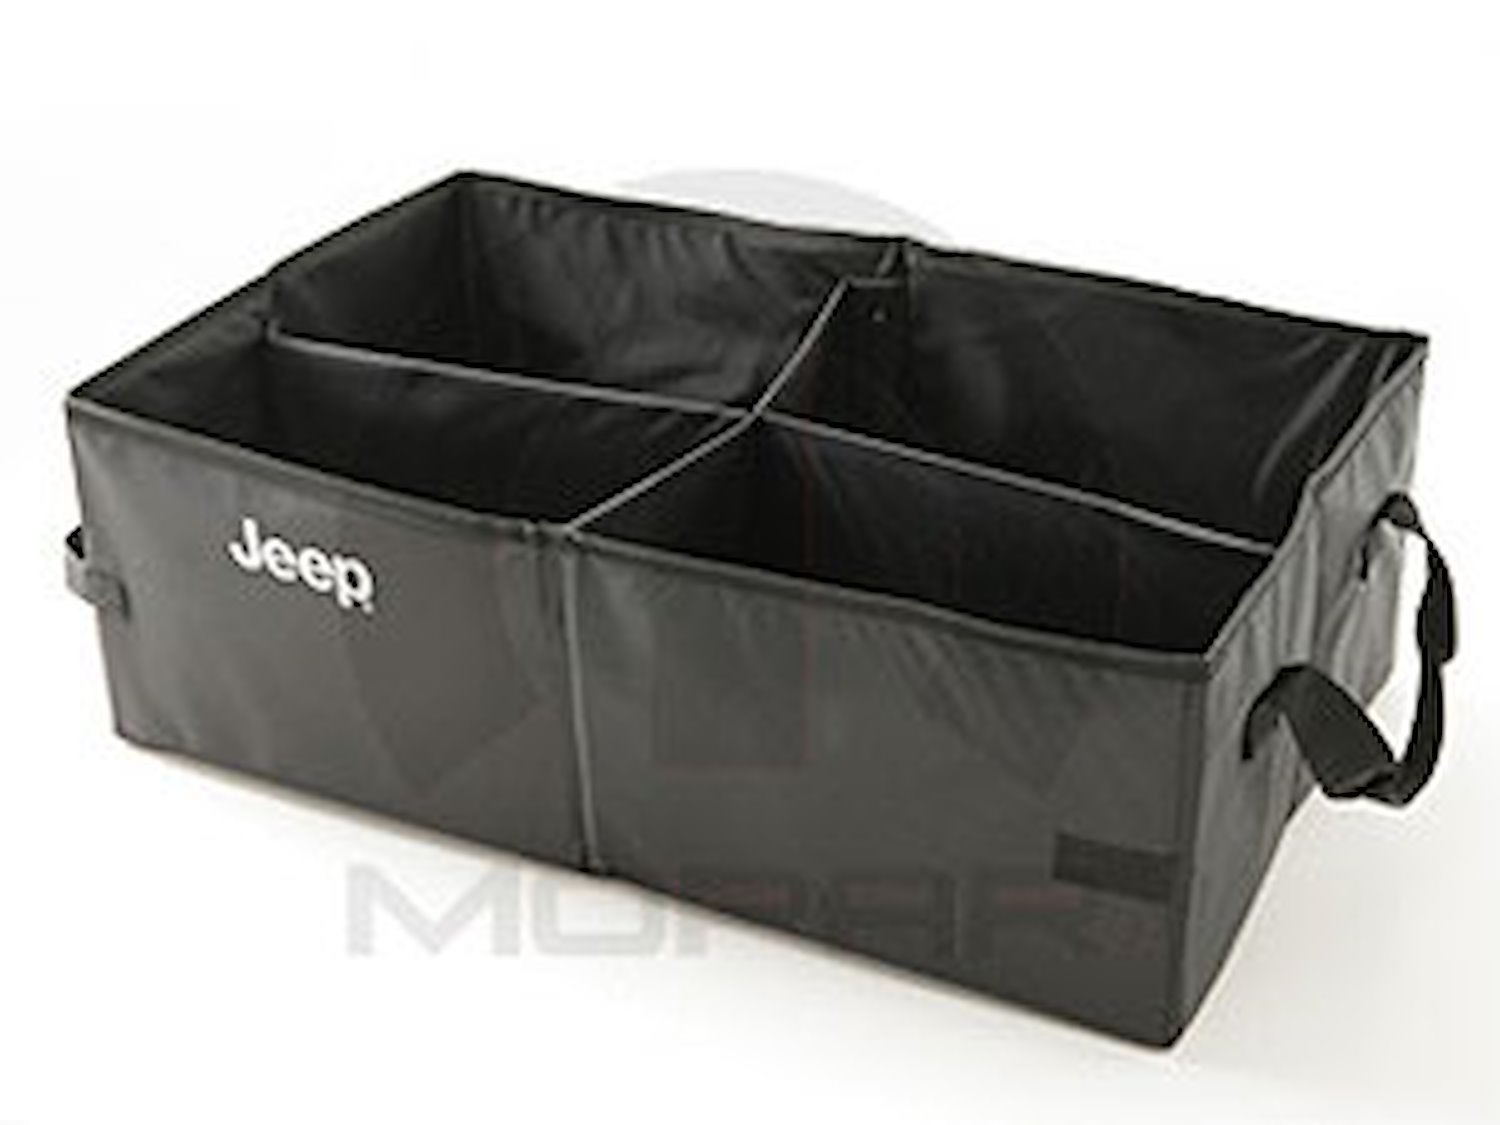 Collapsible Cargo Tote 2000-14 Jeep Vehicles